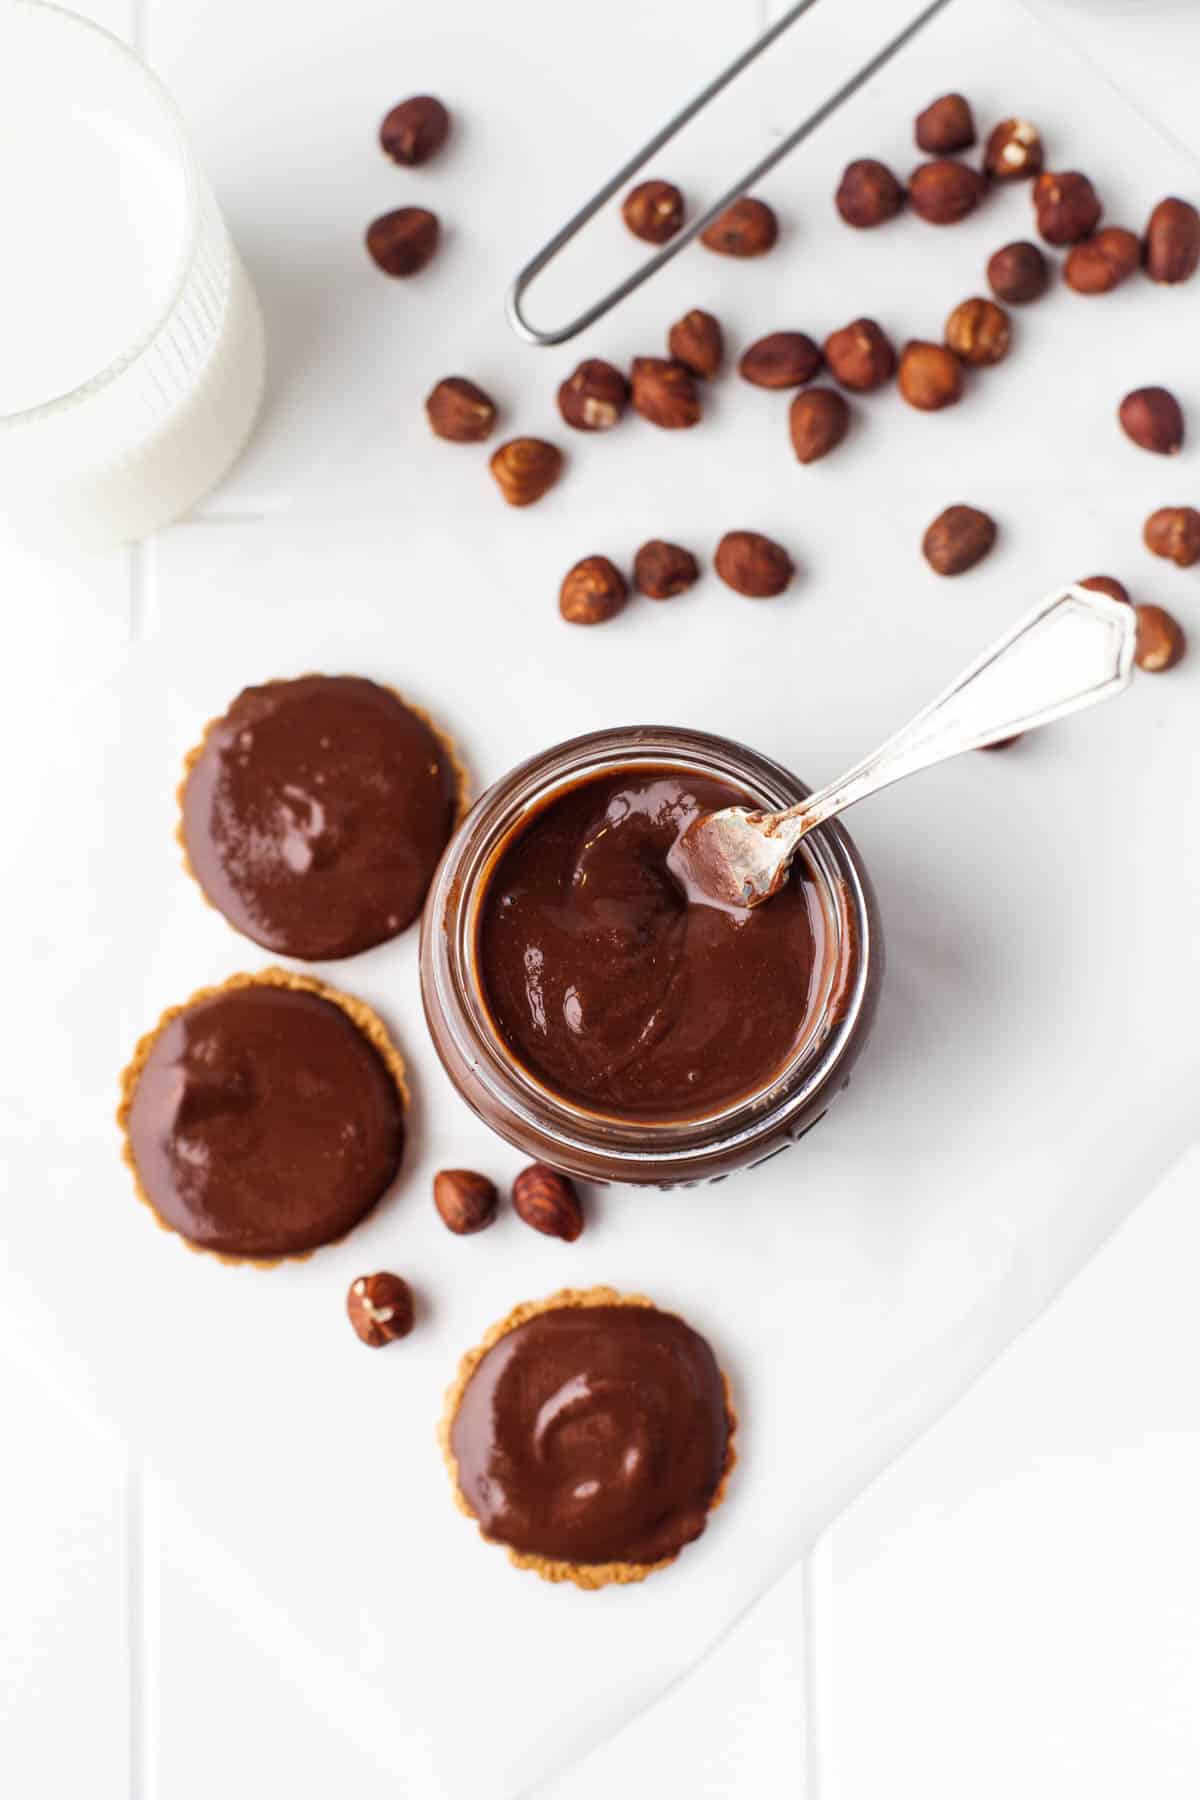 A glossy, smooth homemade chocolate hazelnut spread in a jar and on cookies next to hazelnuts.